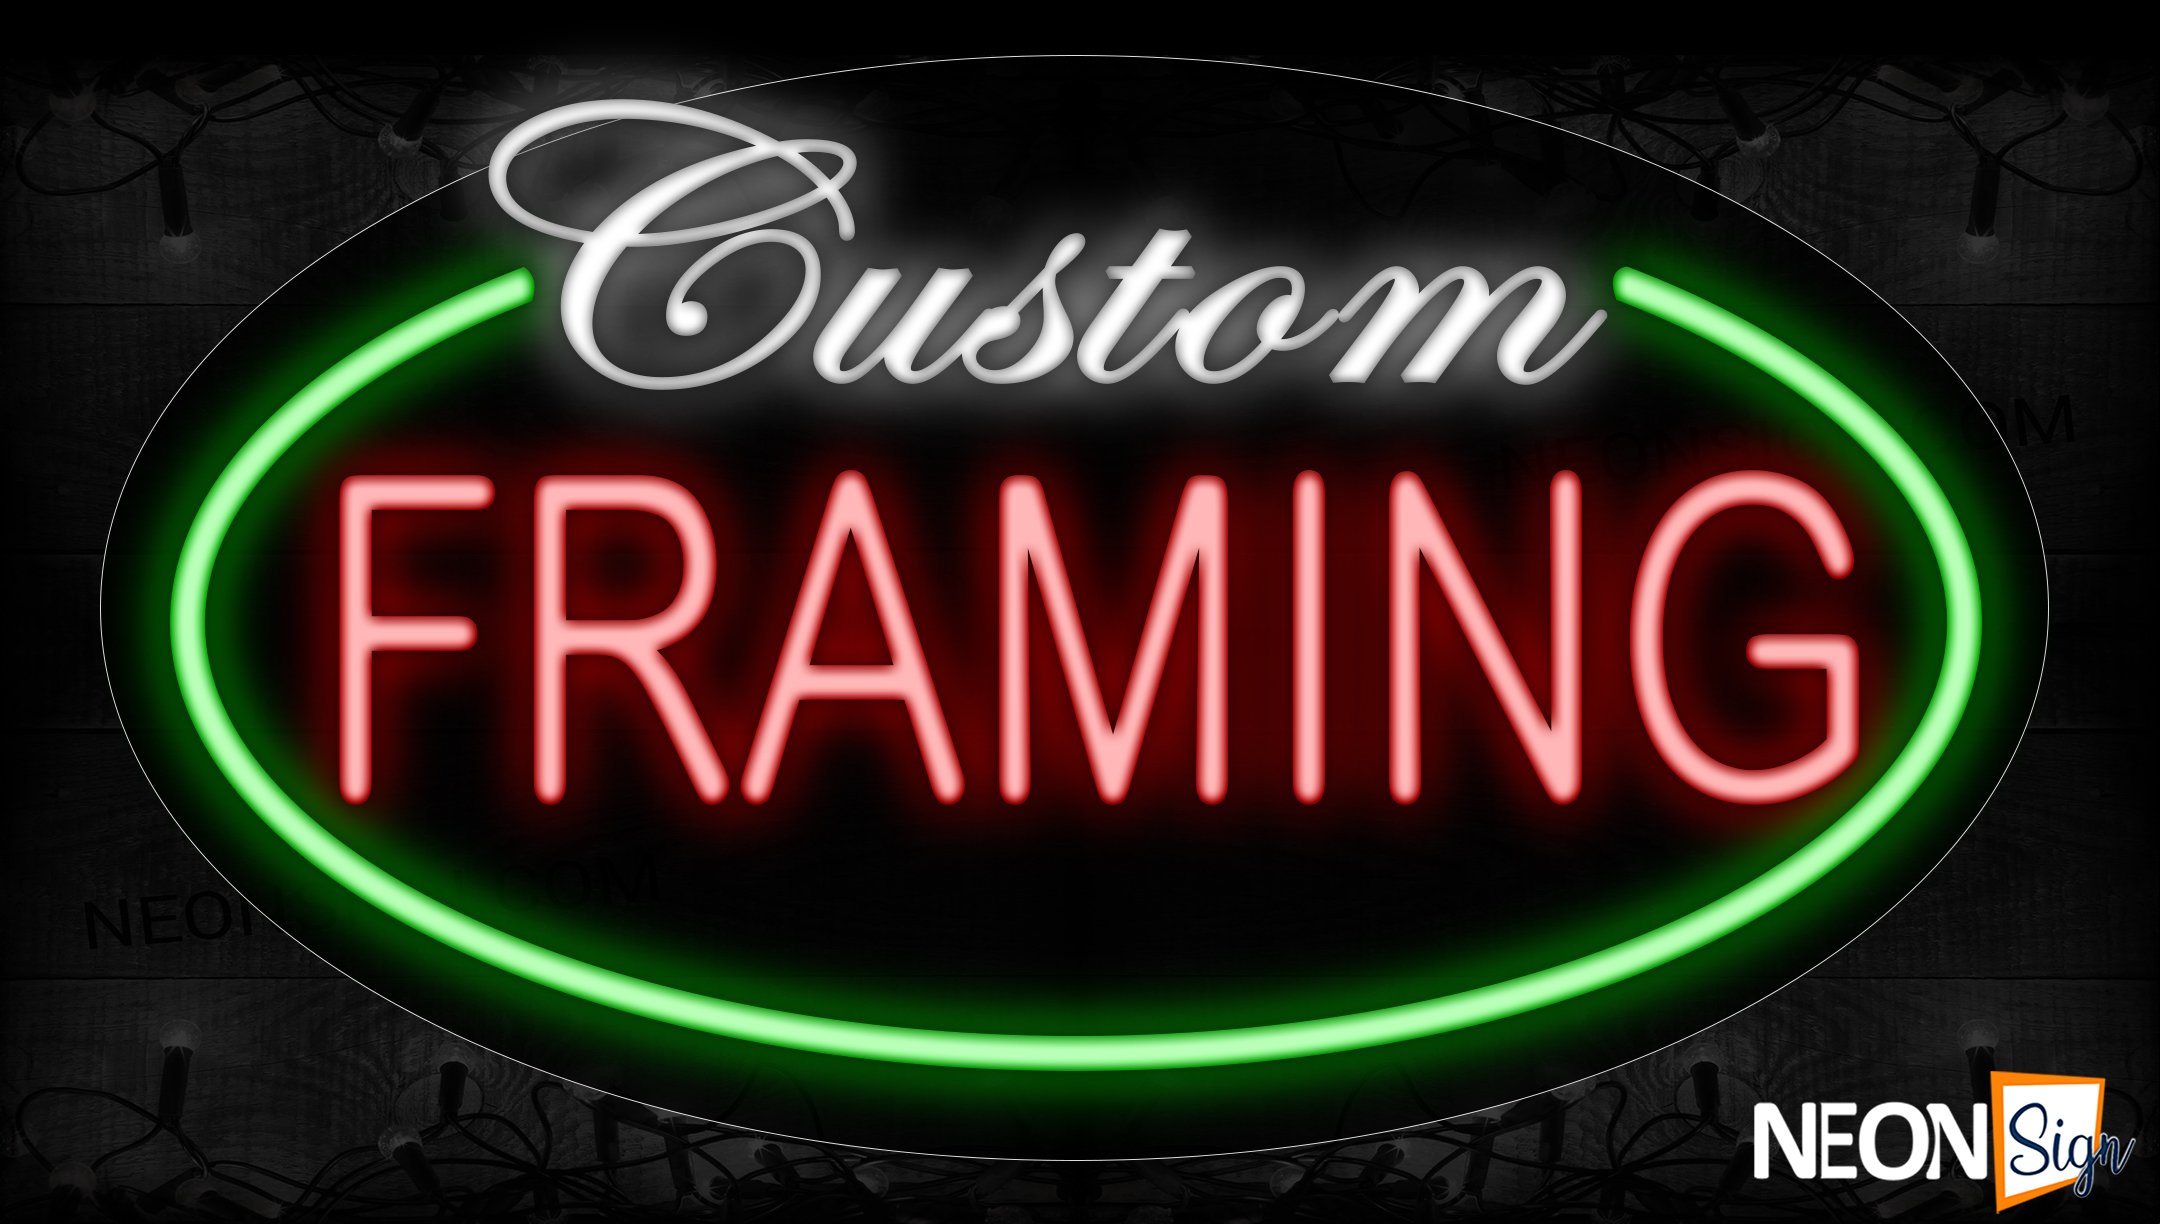 Image of 14102 Custom Framing With Green Oval Border Neon Signs_17x30 Contoured Black Backing